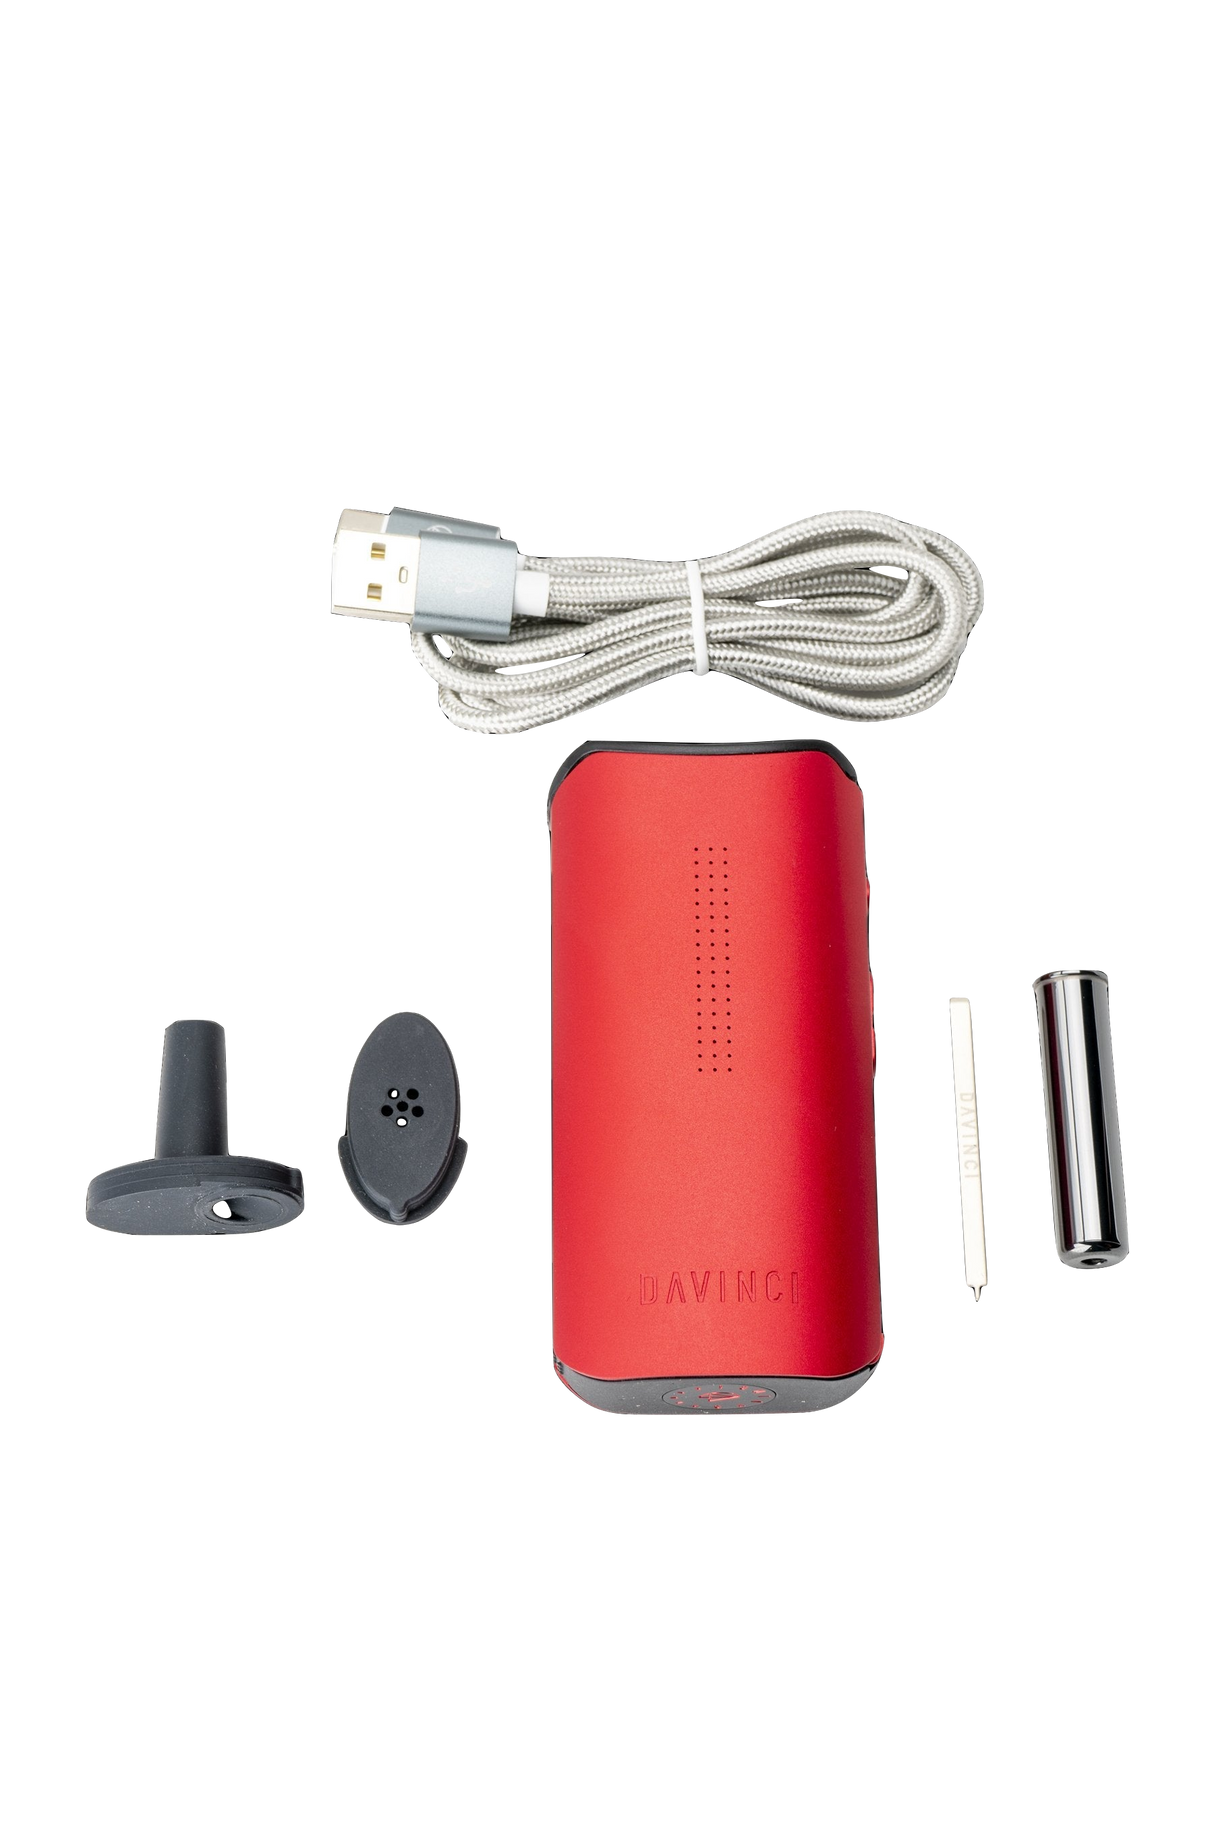 DaVinci IQC Vaporizer in red with accessories, USB cable, and removable battery